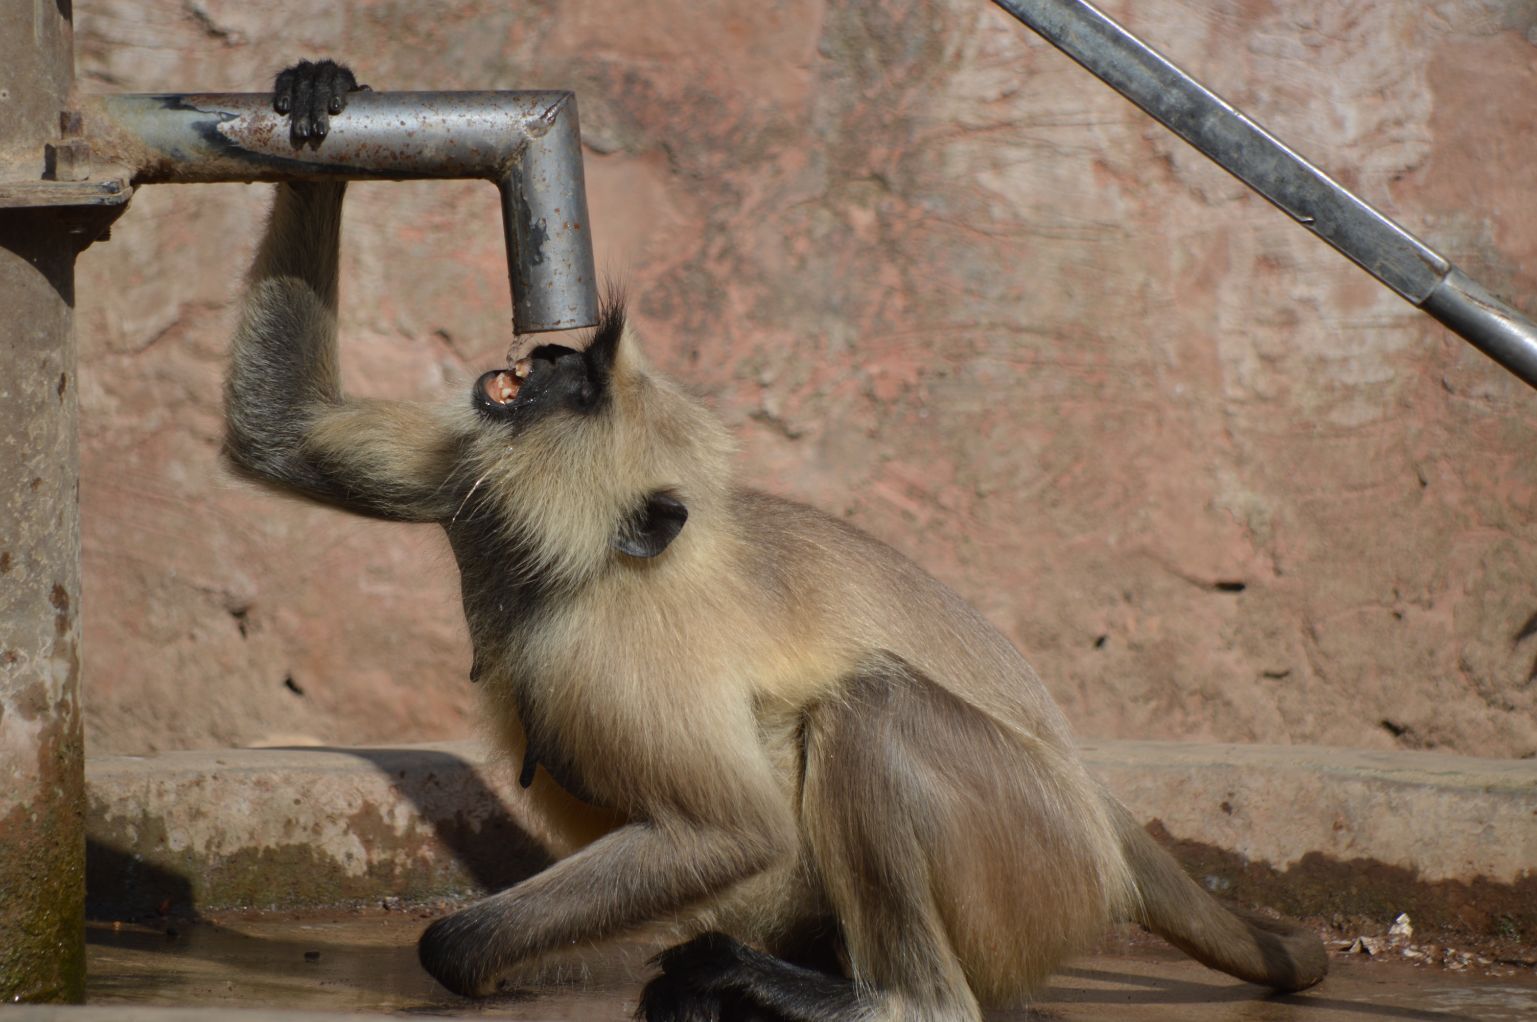 Langur pumped the water and drank from the tap!